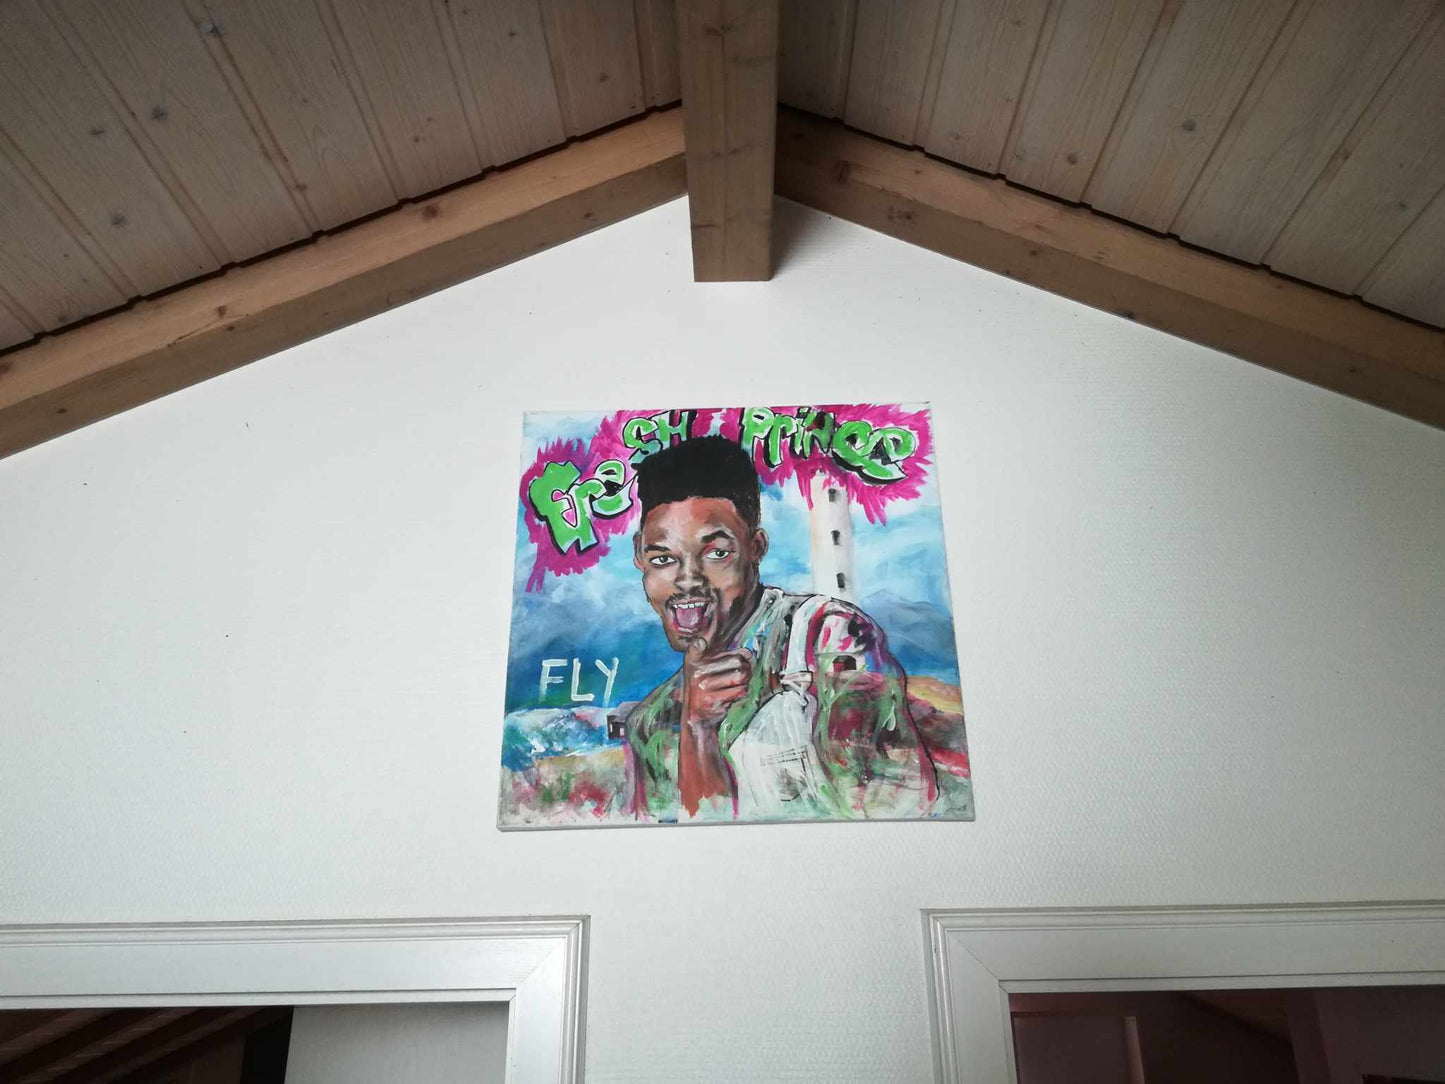 Fresh Prince of Bel Air (Will Smith) - Fly - 50cm x 50cm